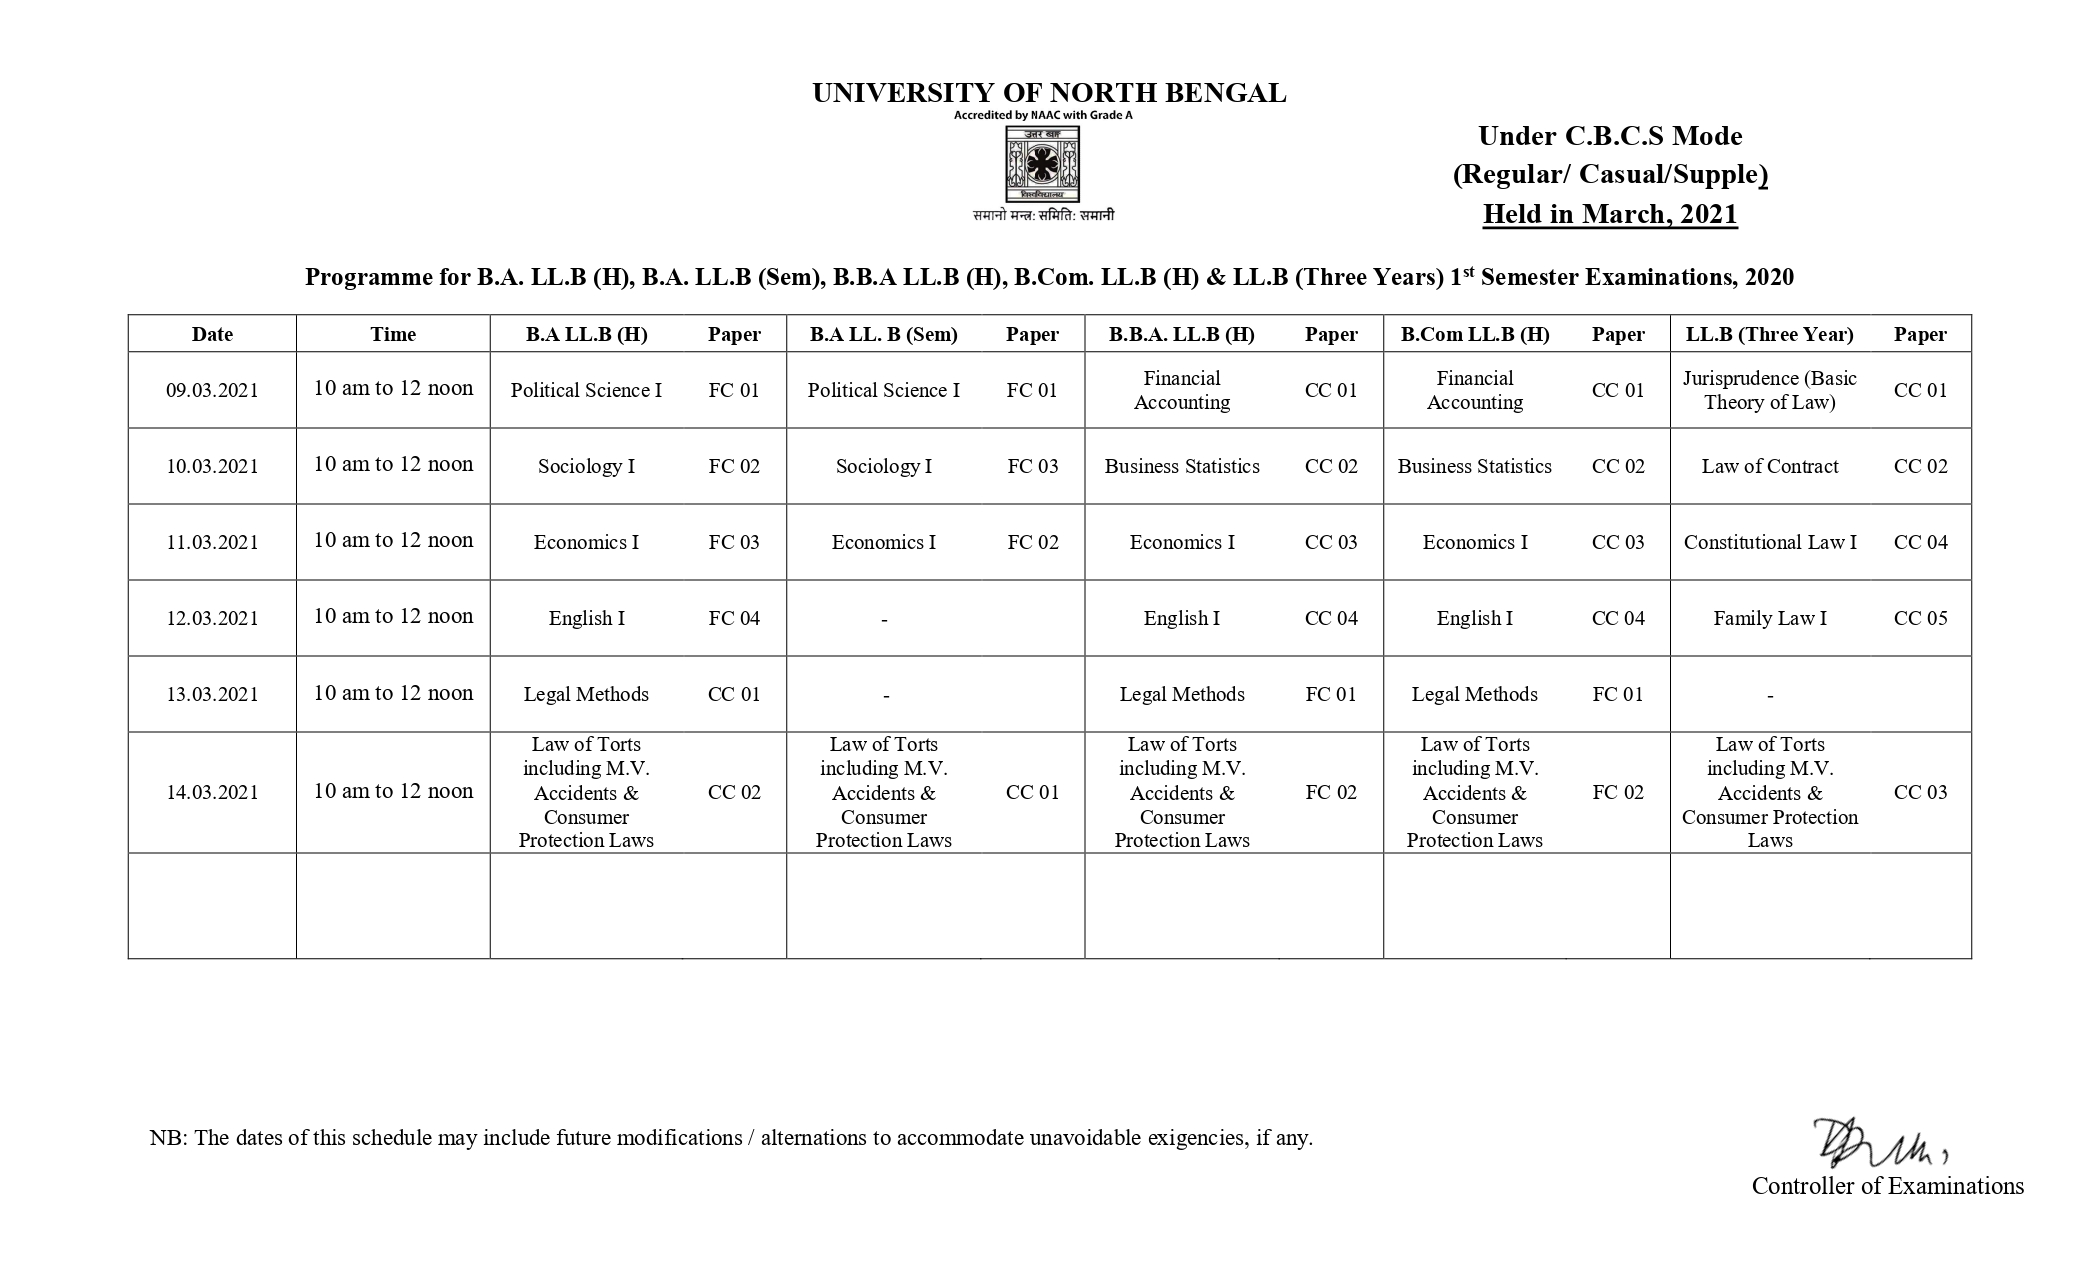 EXAMINATION (MARCH-21) SCHEDULE CBCS MODE SEMESTER-I